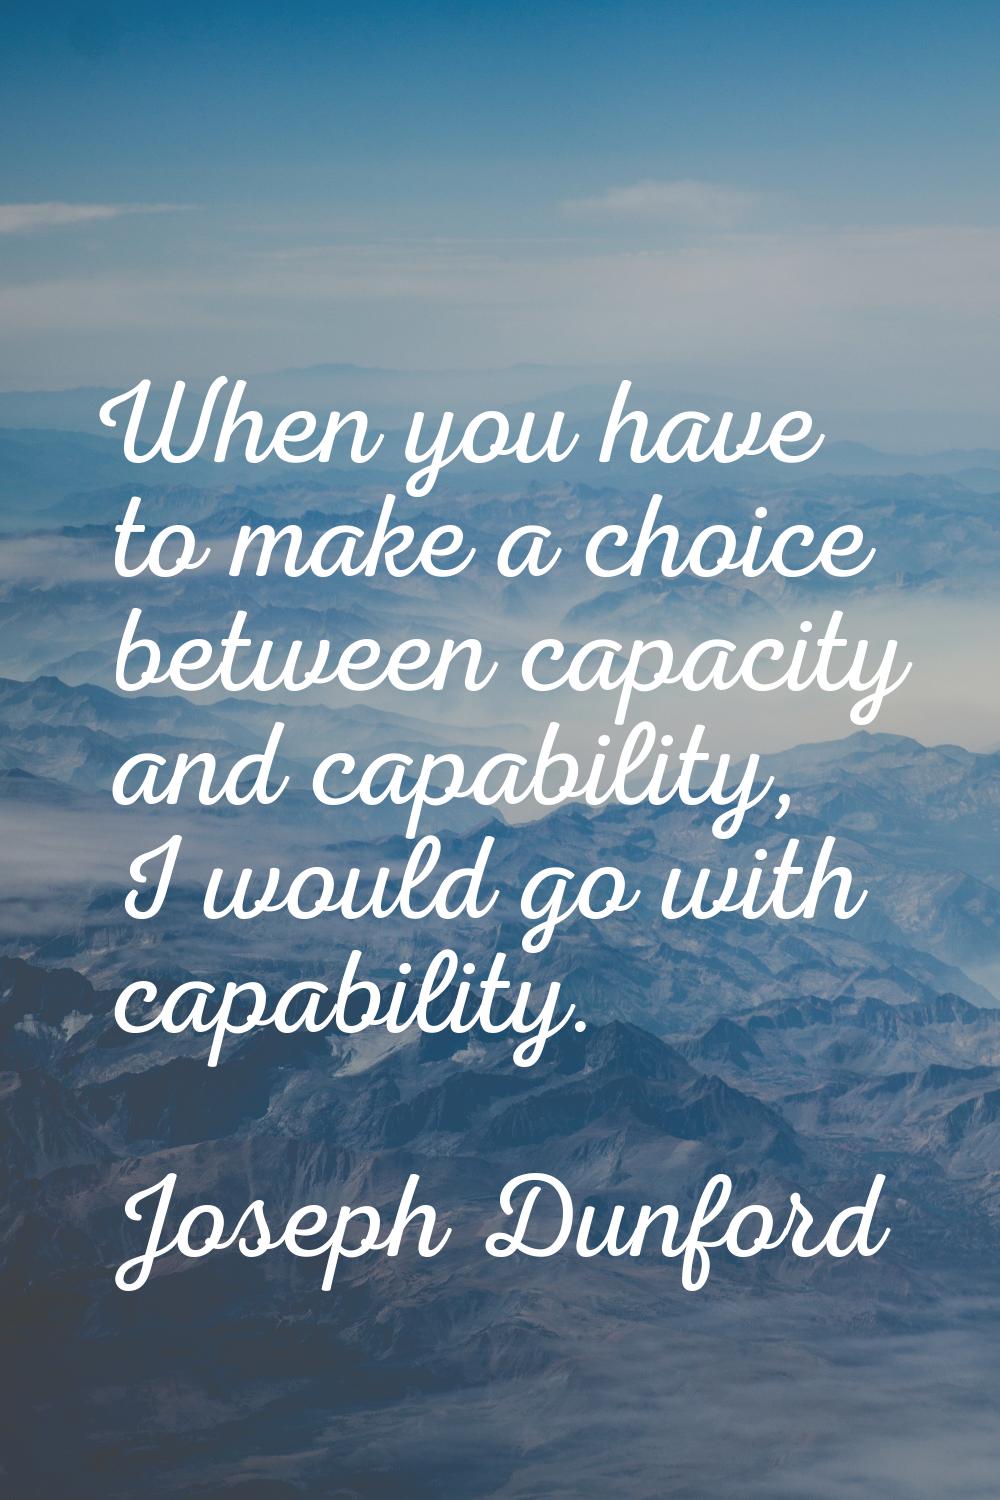 When you have to make a choice between capacity and capability, I would go with capability.